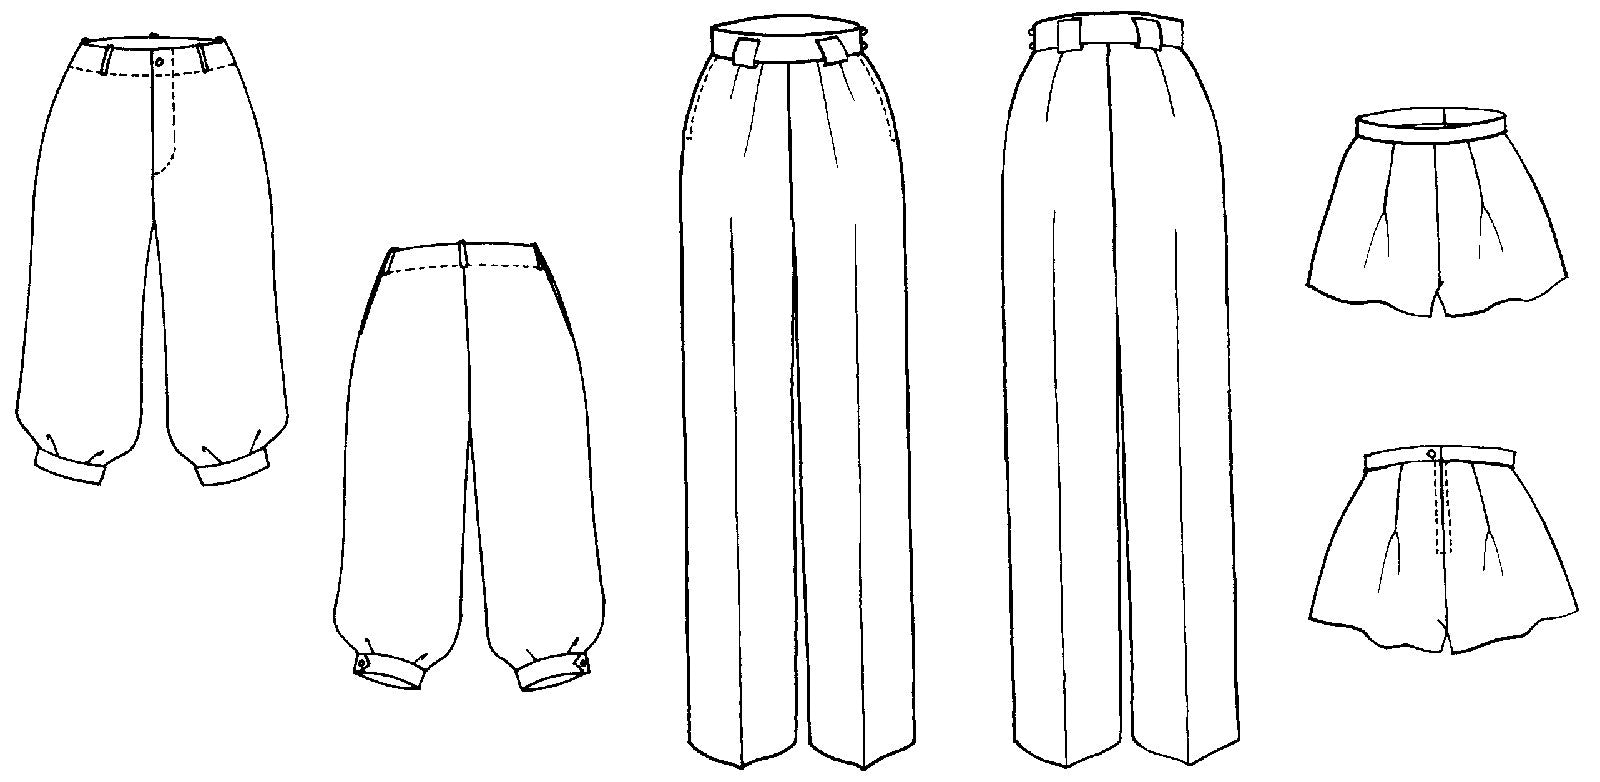 Top more than 180 pants flat sketch latest